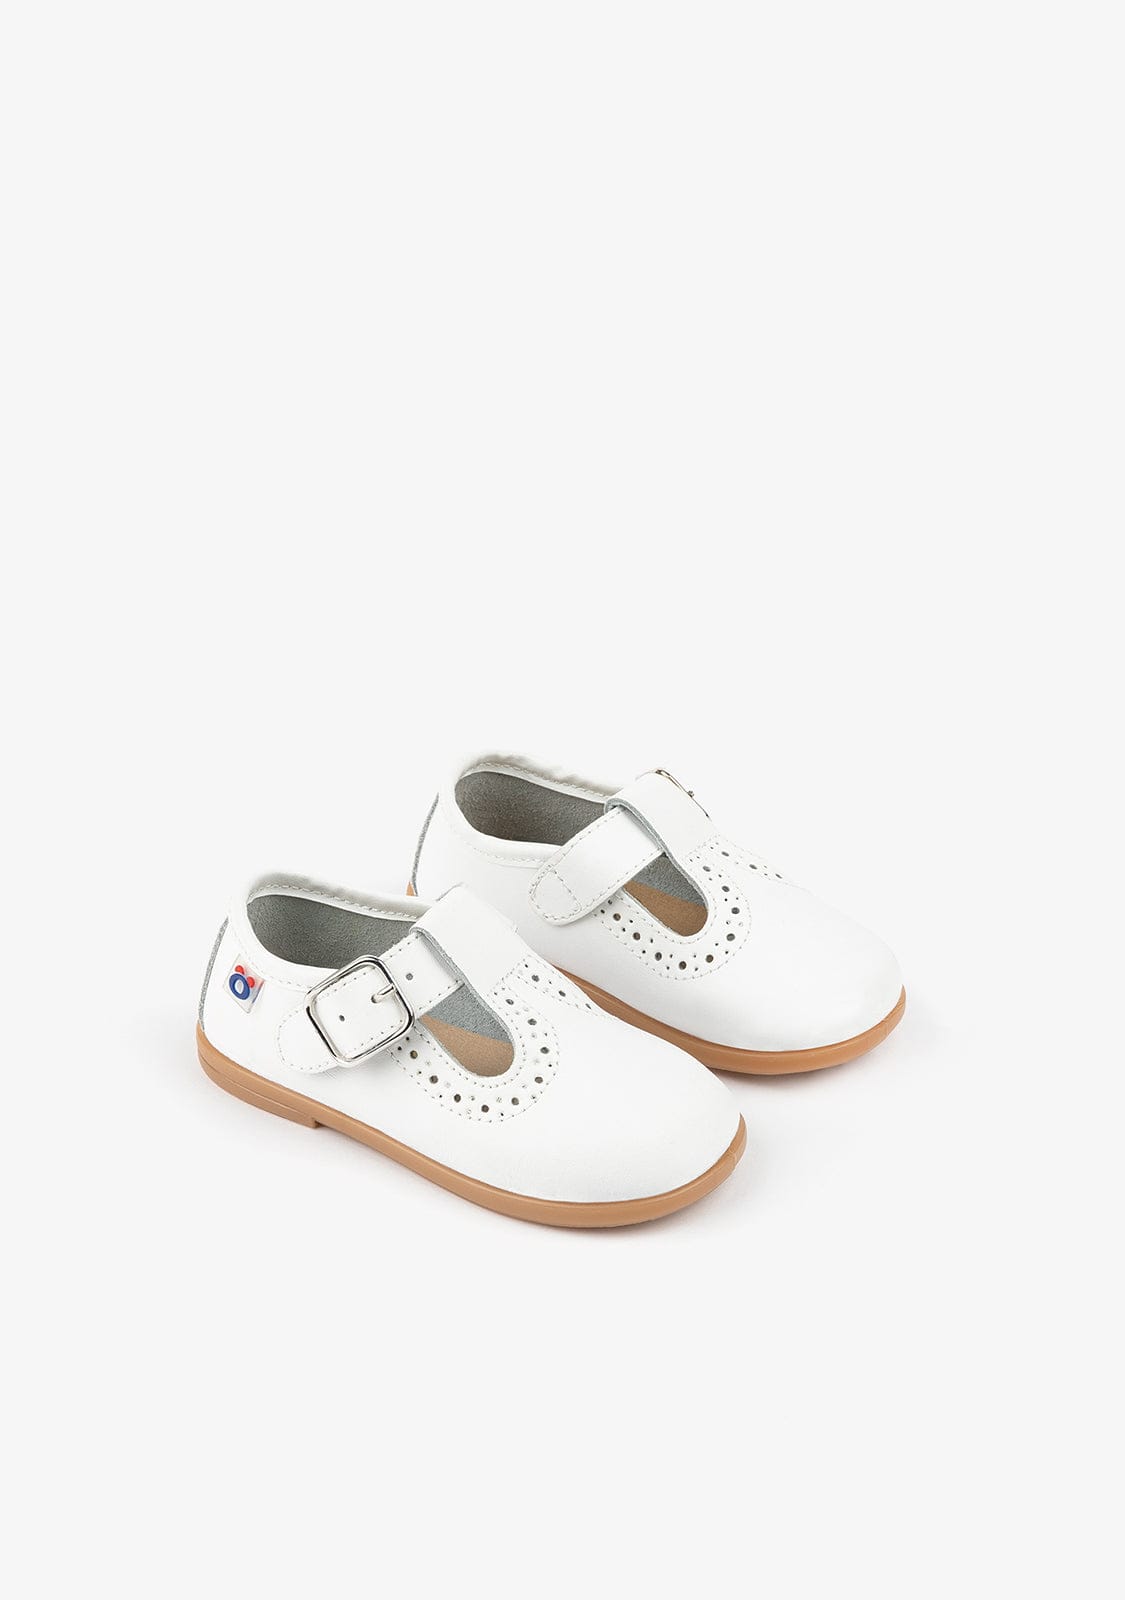 OSITO Shoes Baby's White Washable Leather Shoes Punched Detail